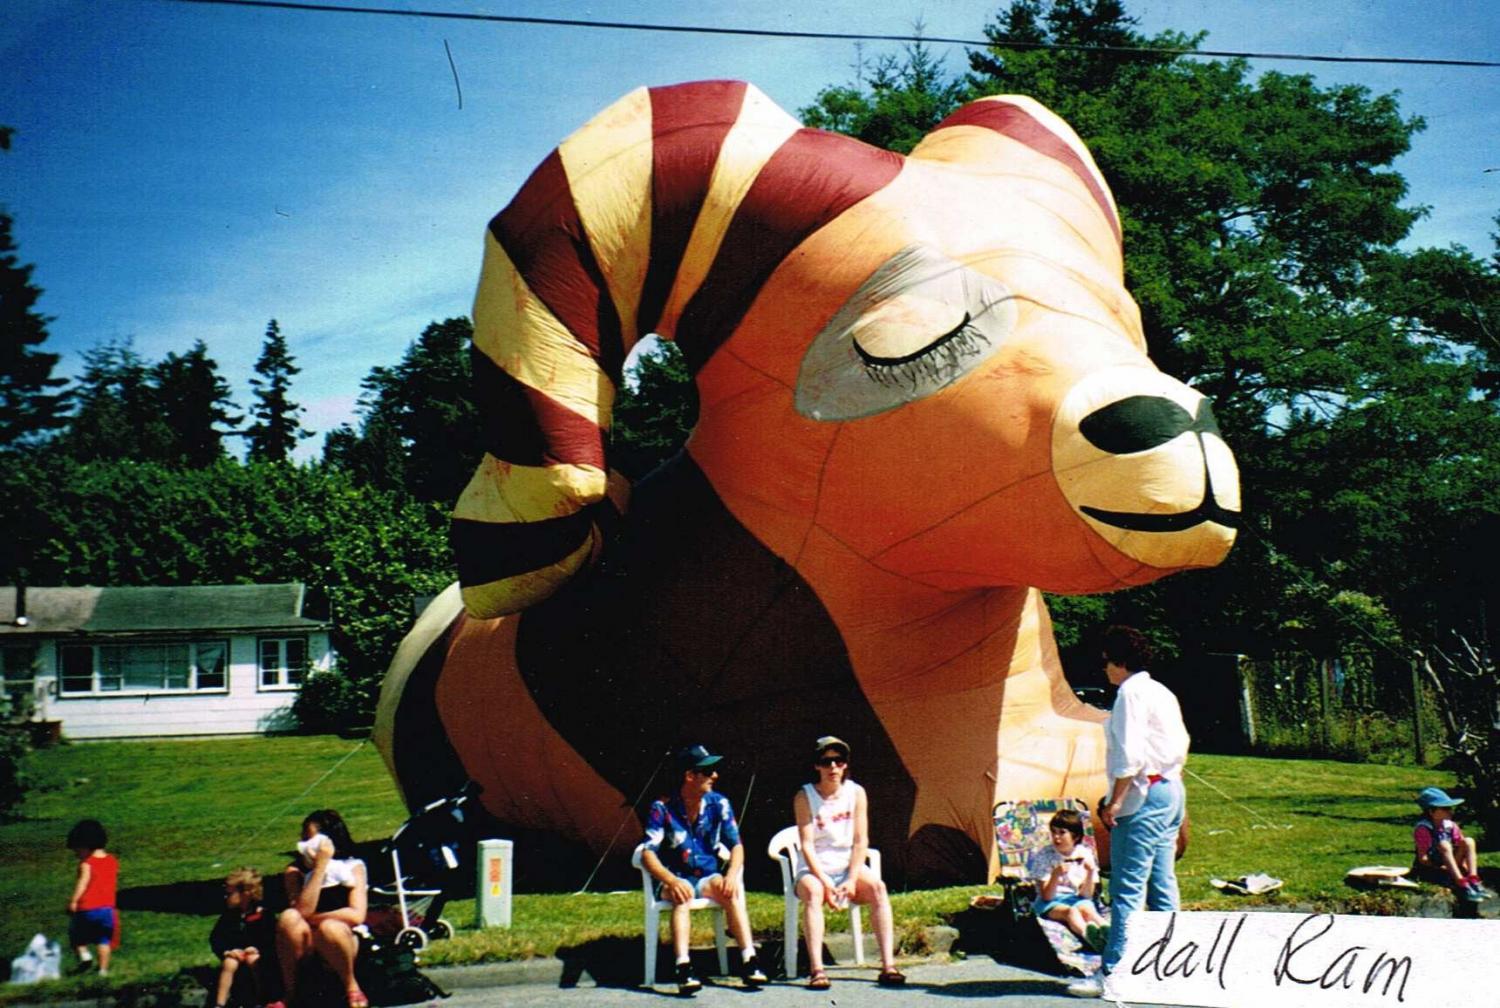 Giant inflatable ram - Evelyn Roth